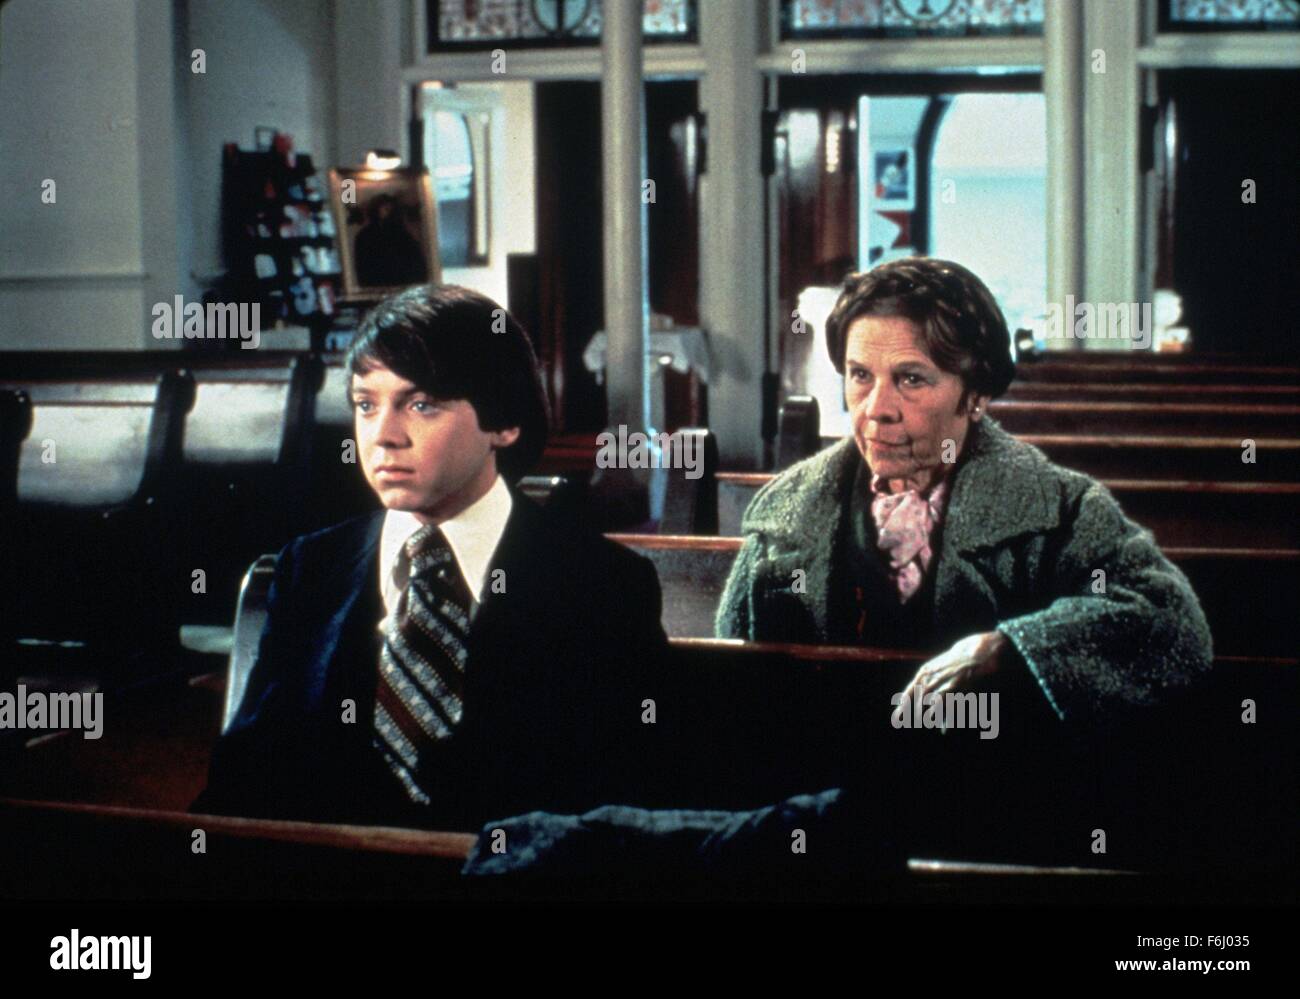 1972, Film Title: HAROLD AND MAUDE, Director: HAL ASHBY, Studio: PARAMOUNT, Pictured: BUD CORT, RUTH GORDON, CHURCH, PEW, CATHOLIC, LOVE (AGE DIFFERENCE). (Credit Image: SNAP) Stock Photo